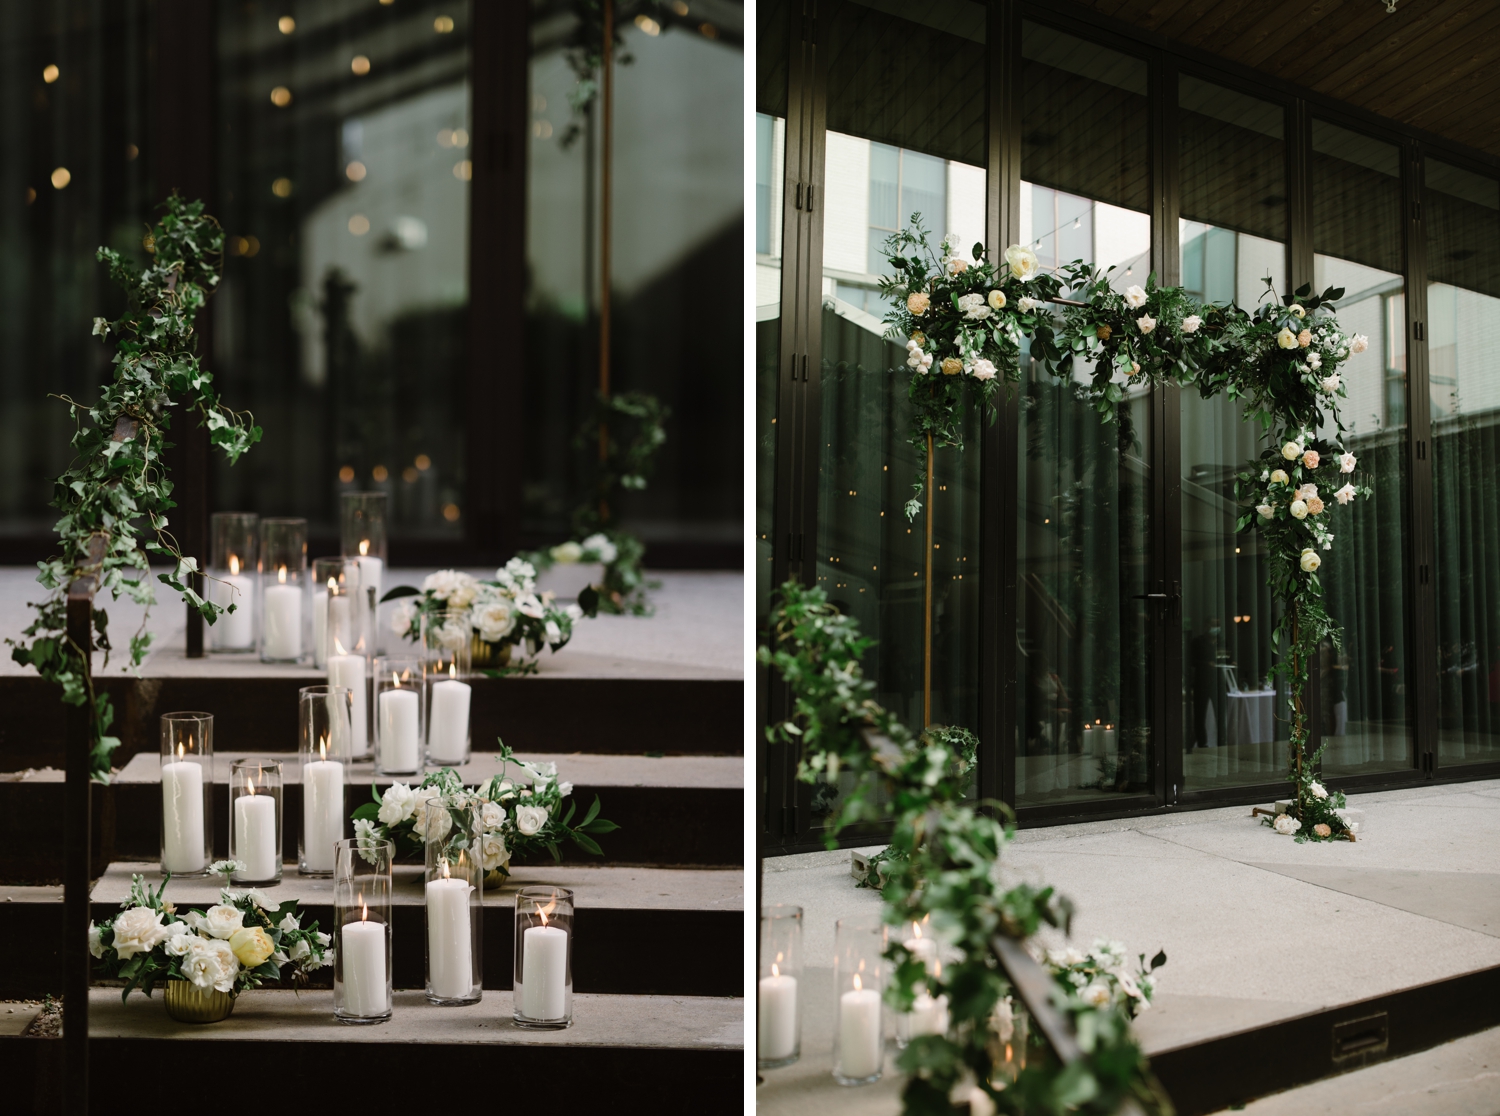 White pillar candles and greenery for a summer wedding ceremony